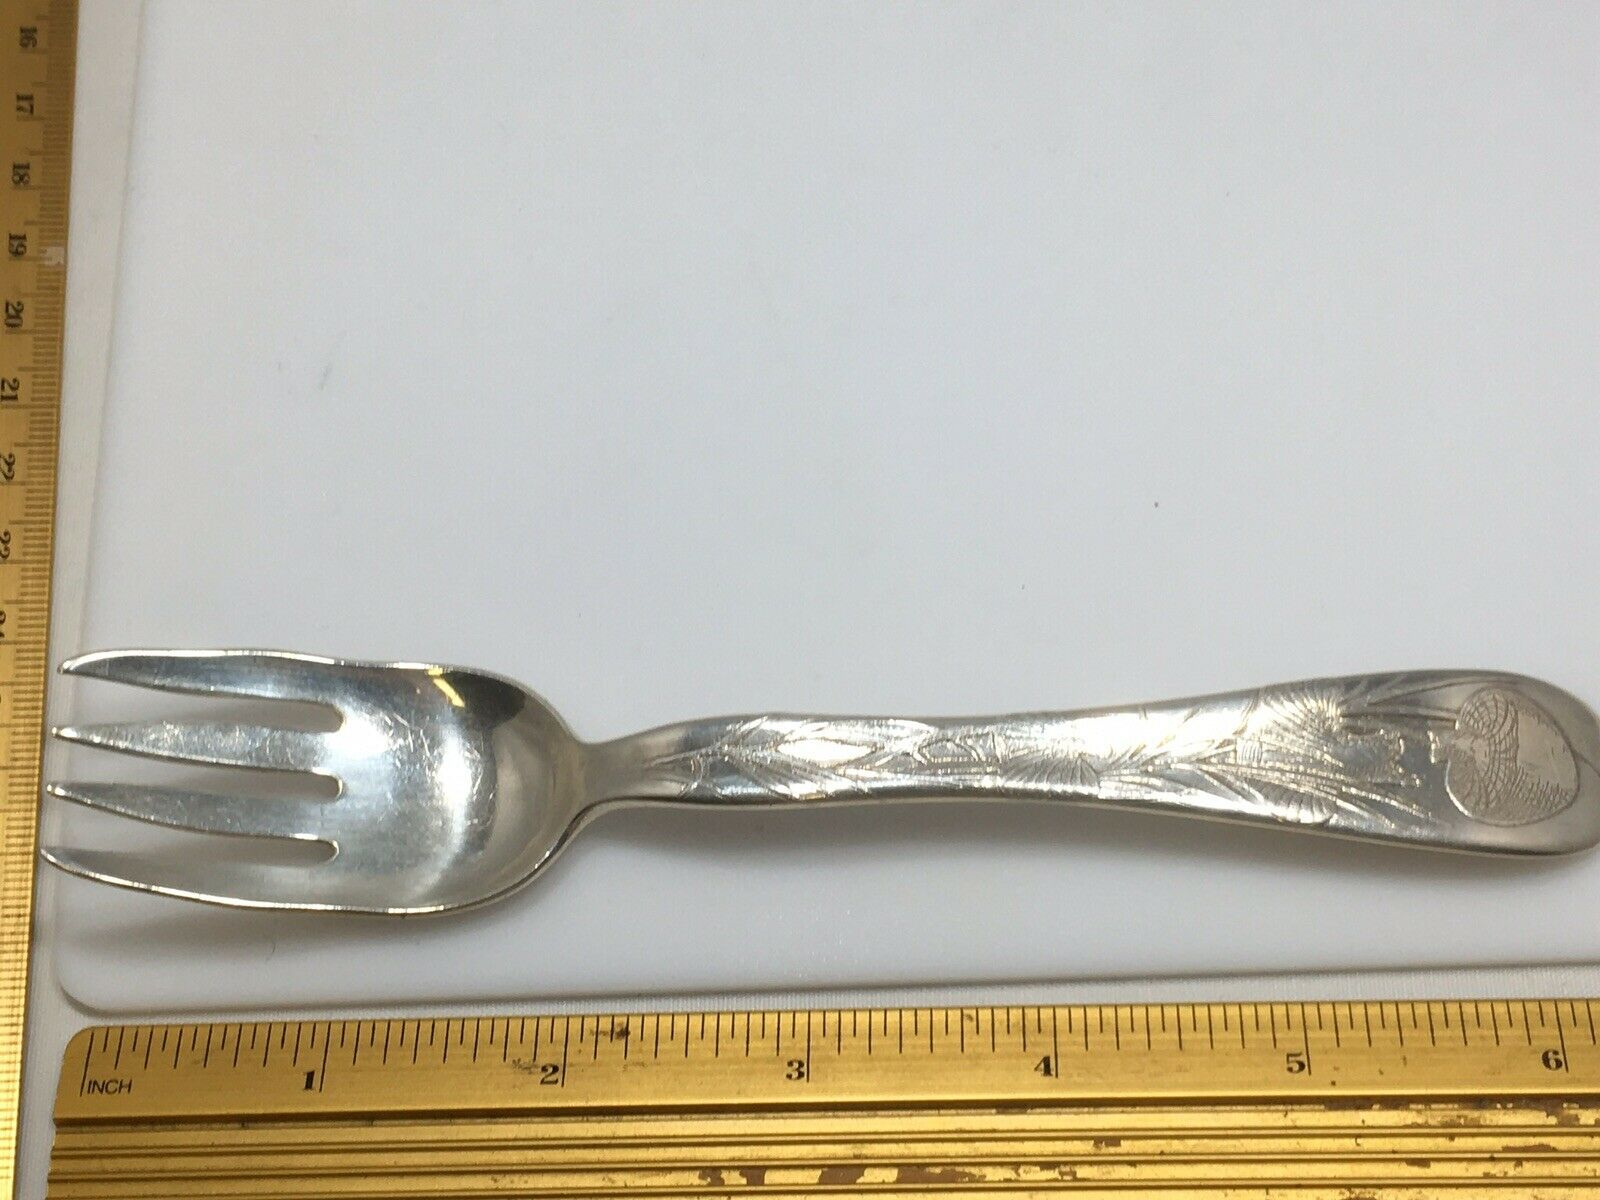 Rare Tiffany LAP OVER EDGE Etched Sterling Silver Pastry Fish 4 Tine Fork.